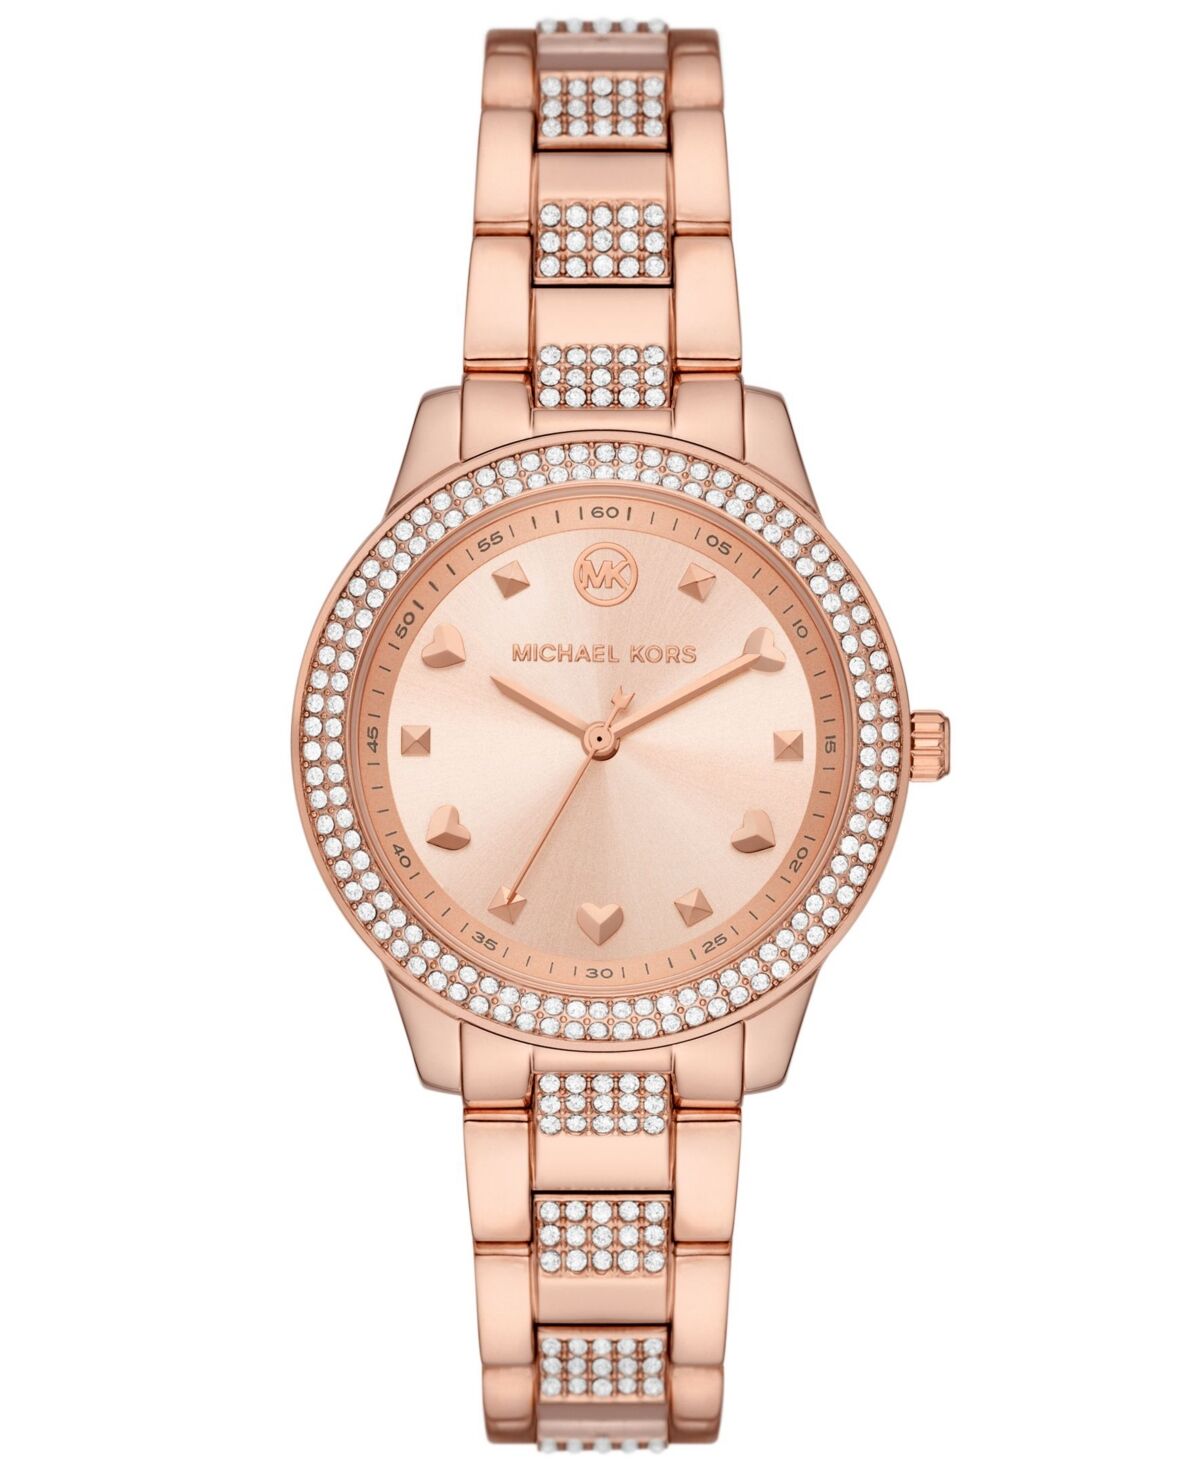 Michael Kors Women's Tibby Three-Hand Rose Gold-Tone Stainless Steel Watch 34mm and Bracelet Gift Set - Rose Gold-Tone